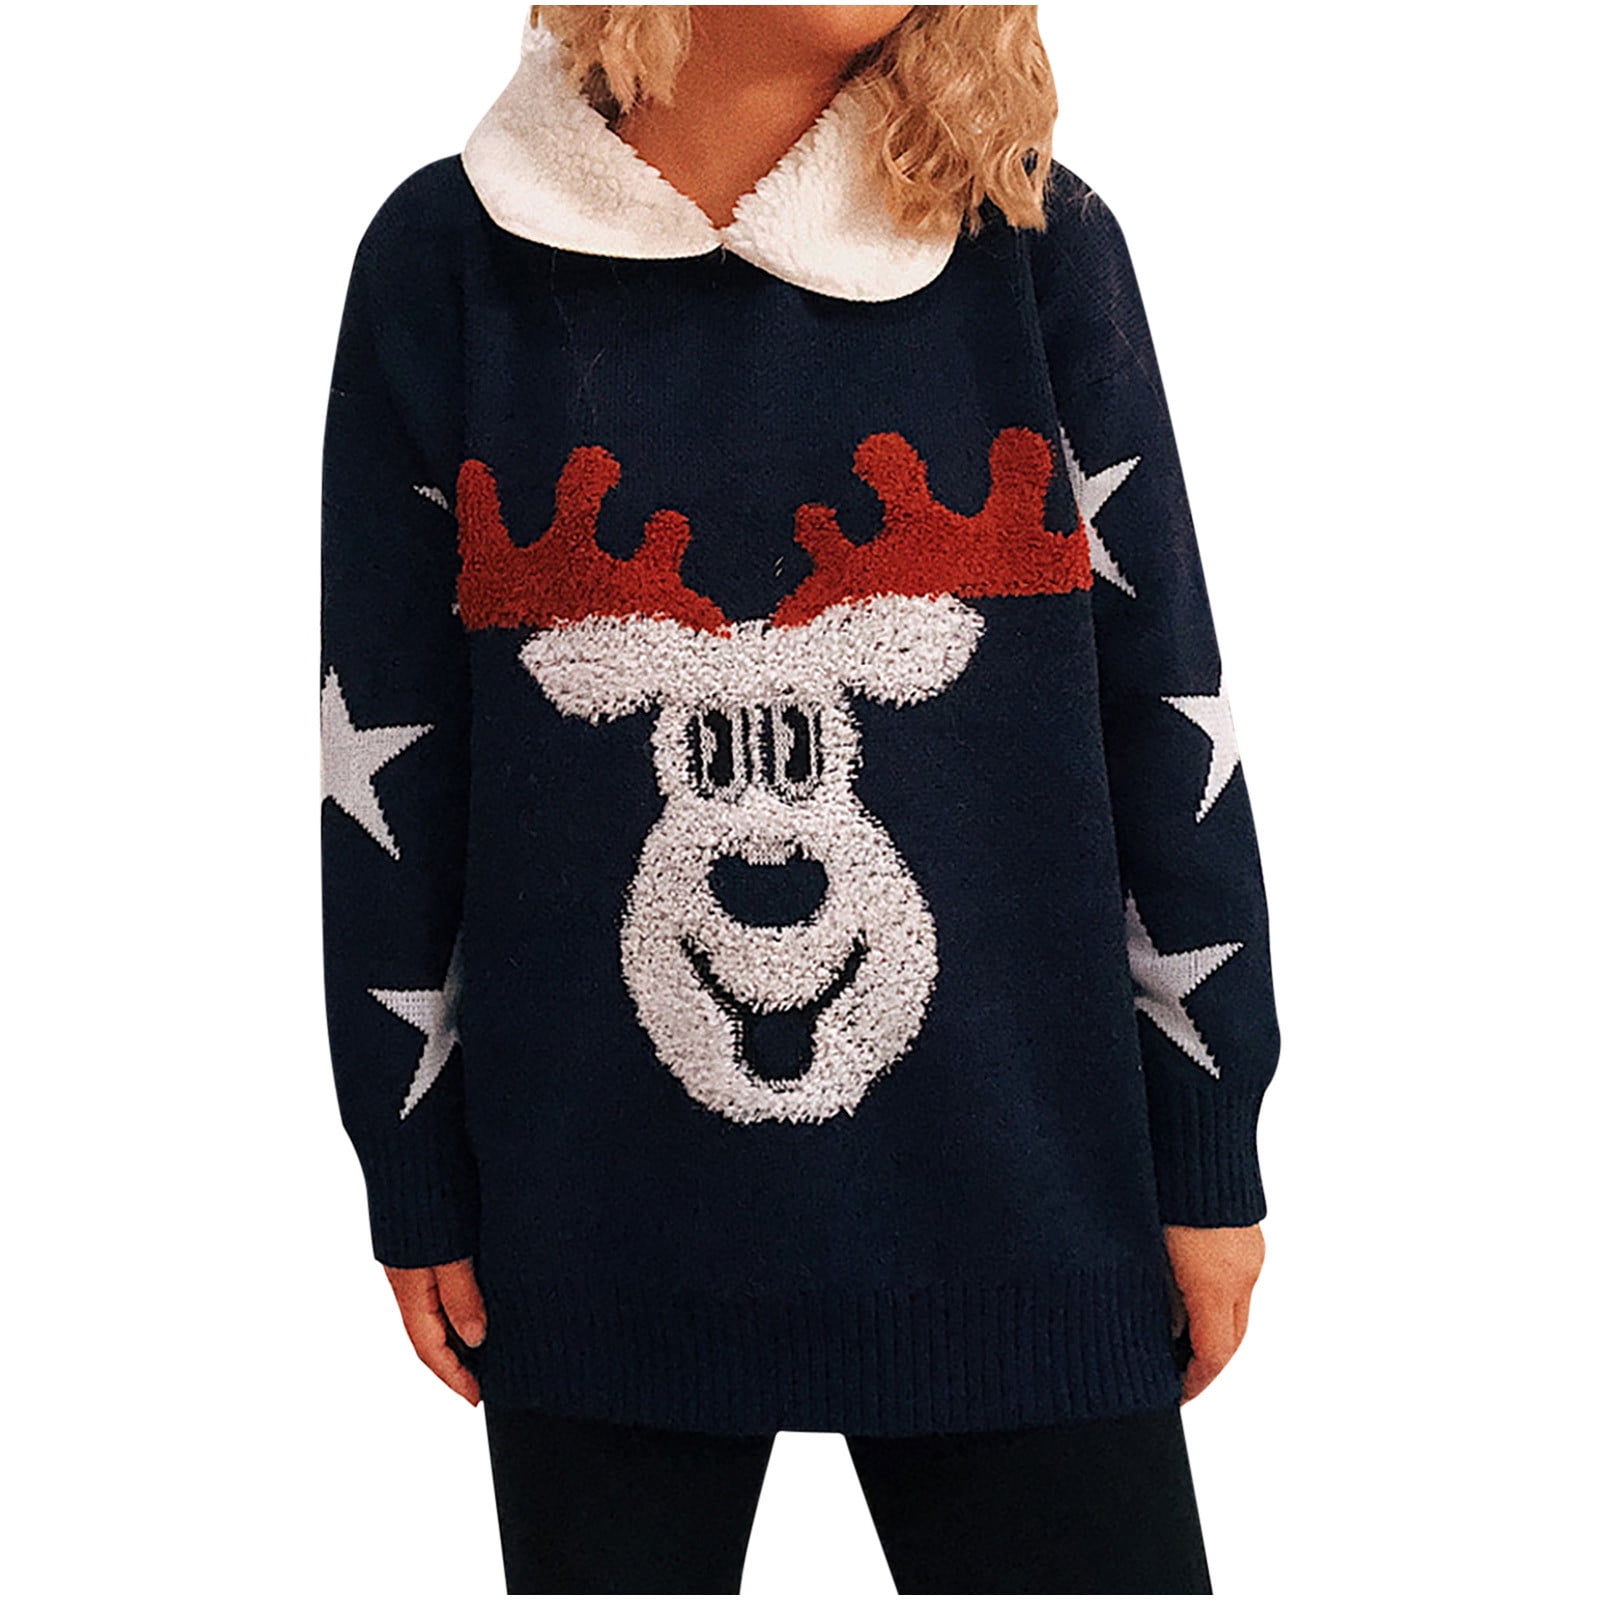 Chiccall Ugly Christmas Sweater for Women, Funny Reindeer Shirt Knit  Sweaters Long Sleeve Splicing Lapel Graphic Tops,on Clearance 